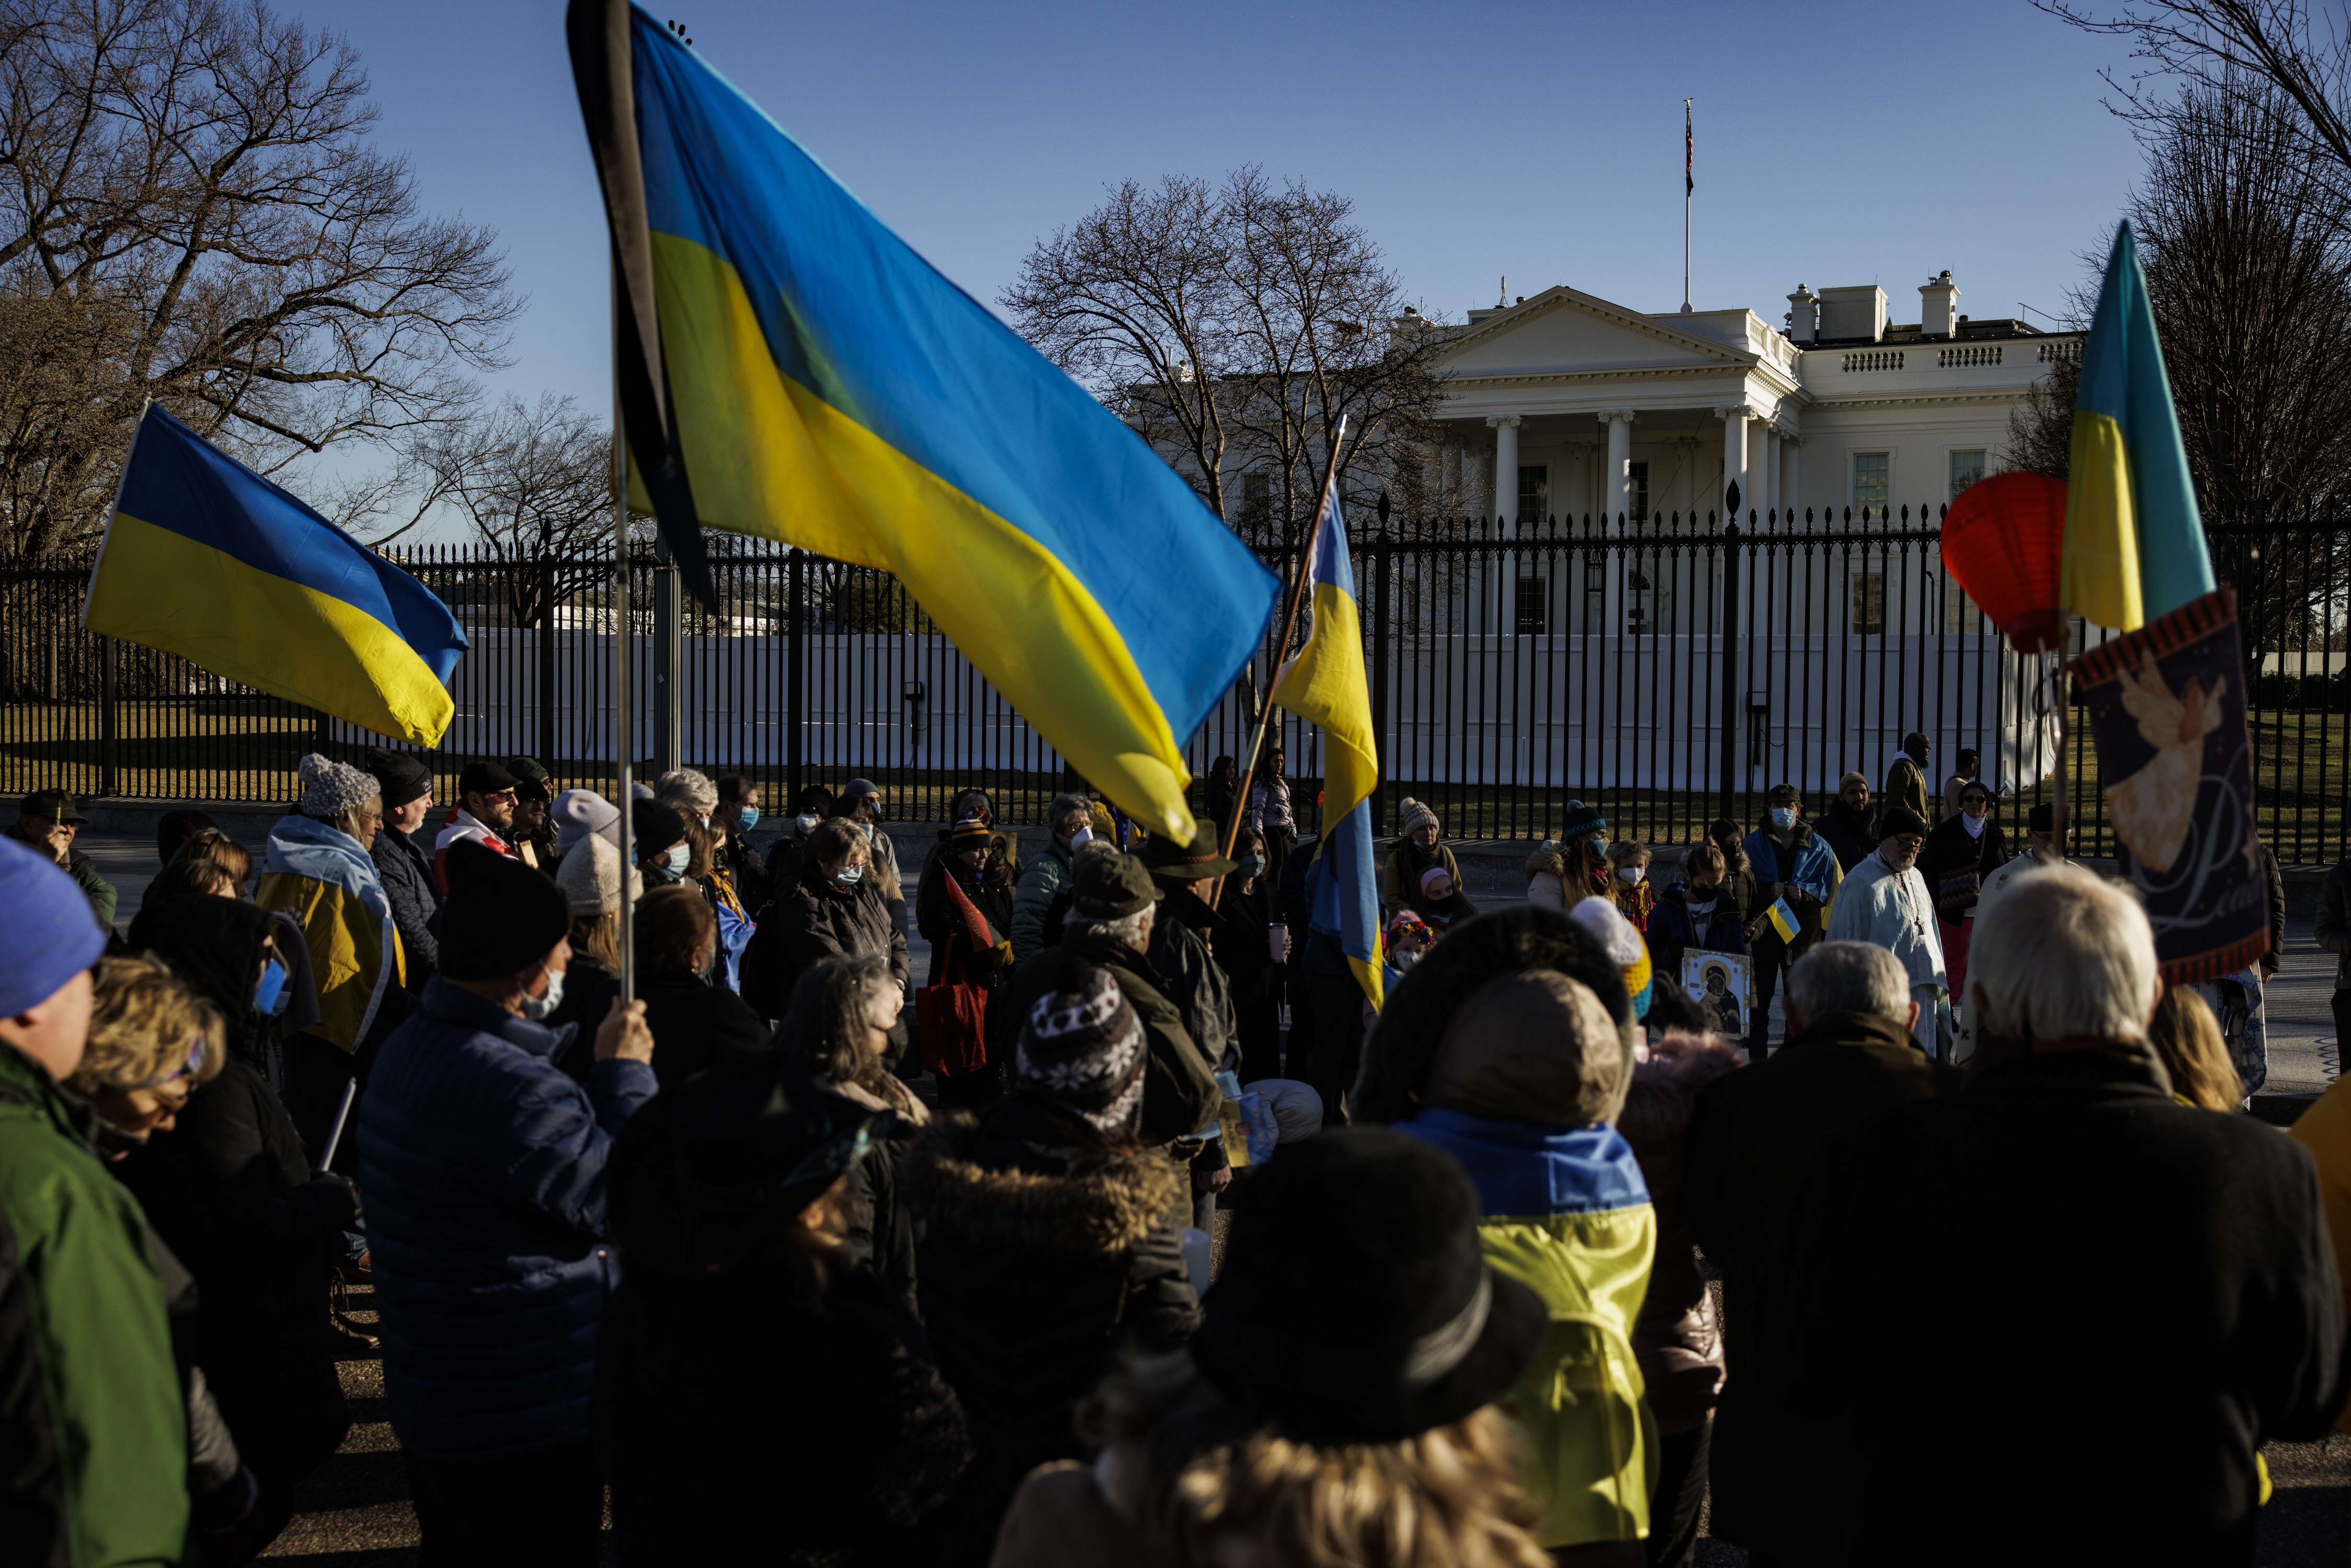 Ukraine supporters rally near White House